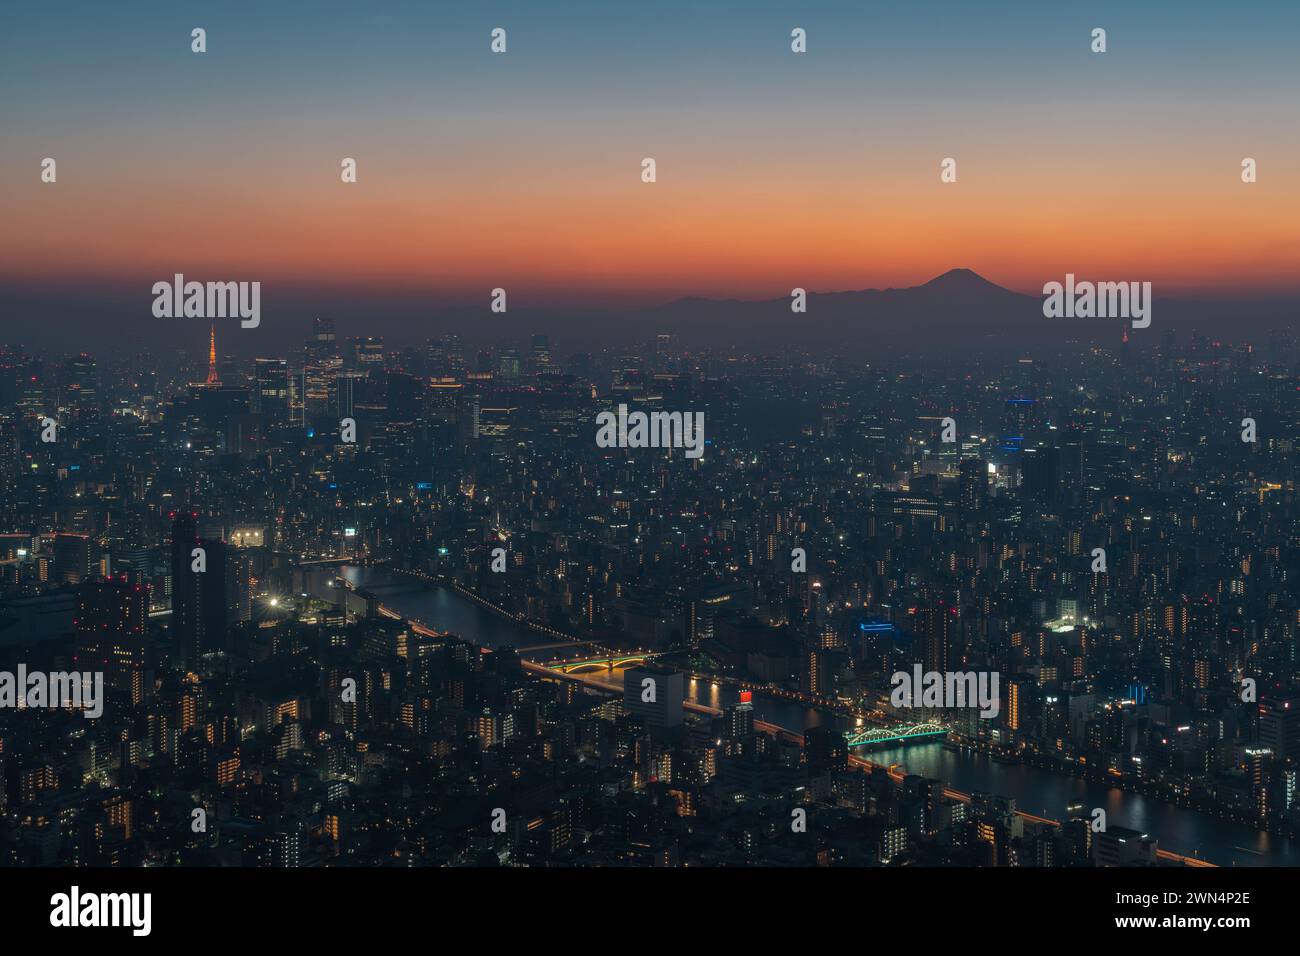 Aerial view of Tokyo cityscape at dusk, Japan. Stock Photo